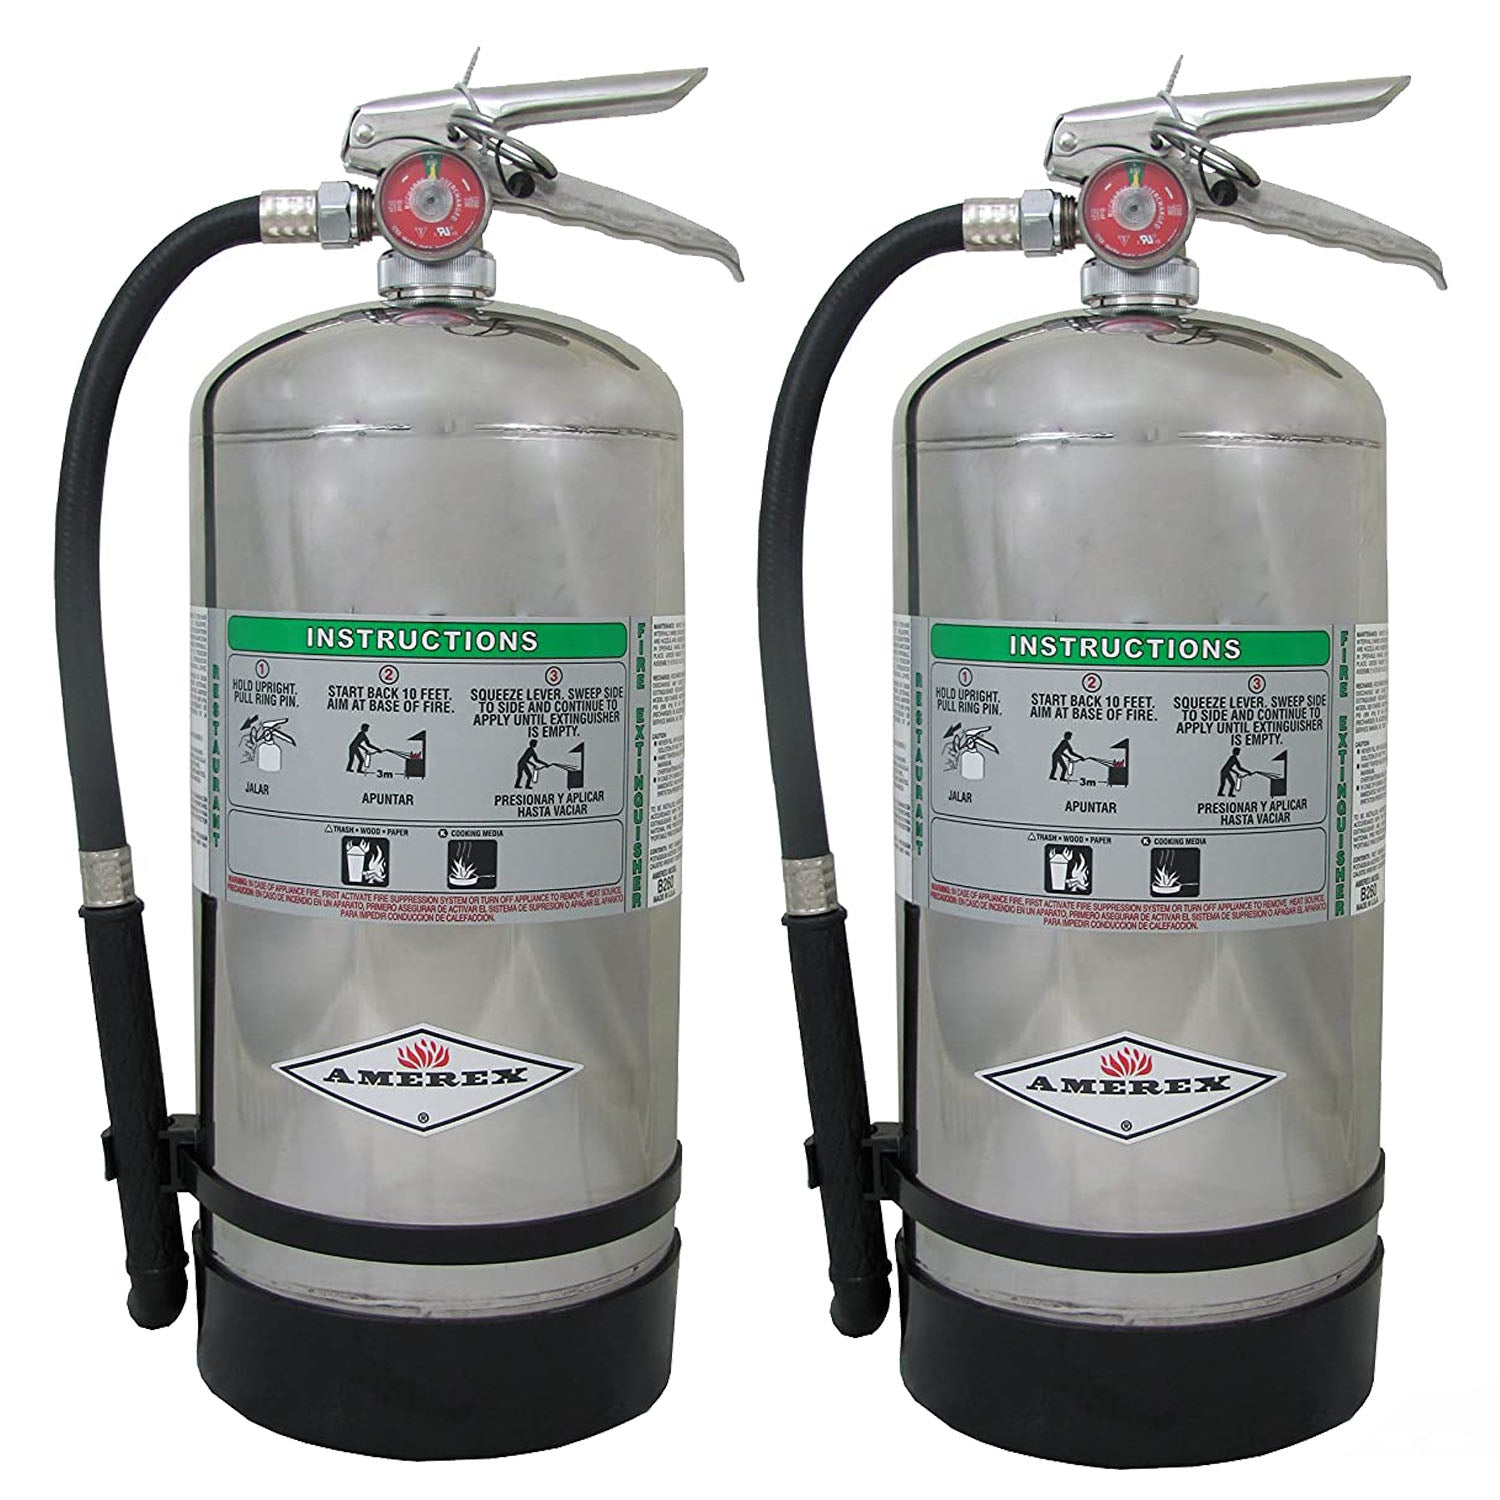 Amerex B260, 6 Liter Wet Chemical Class A K Fire Extinguisher - 2 Pack - Pro-Distributing